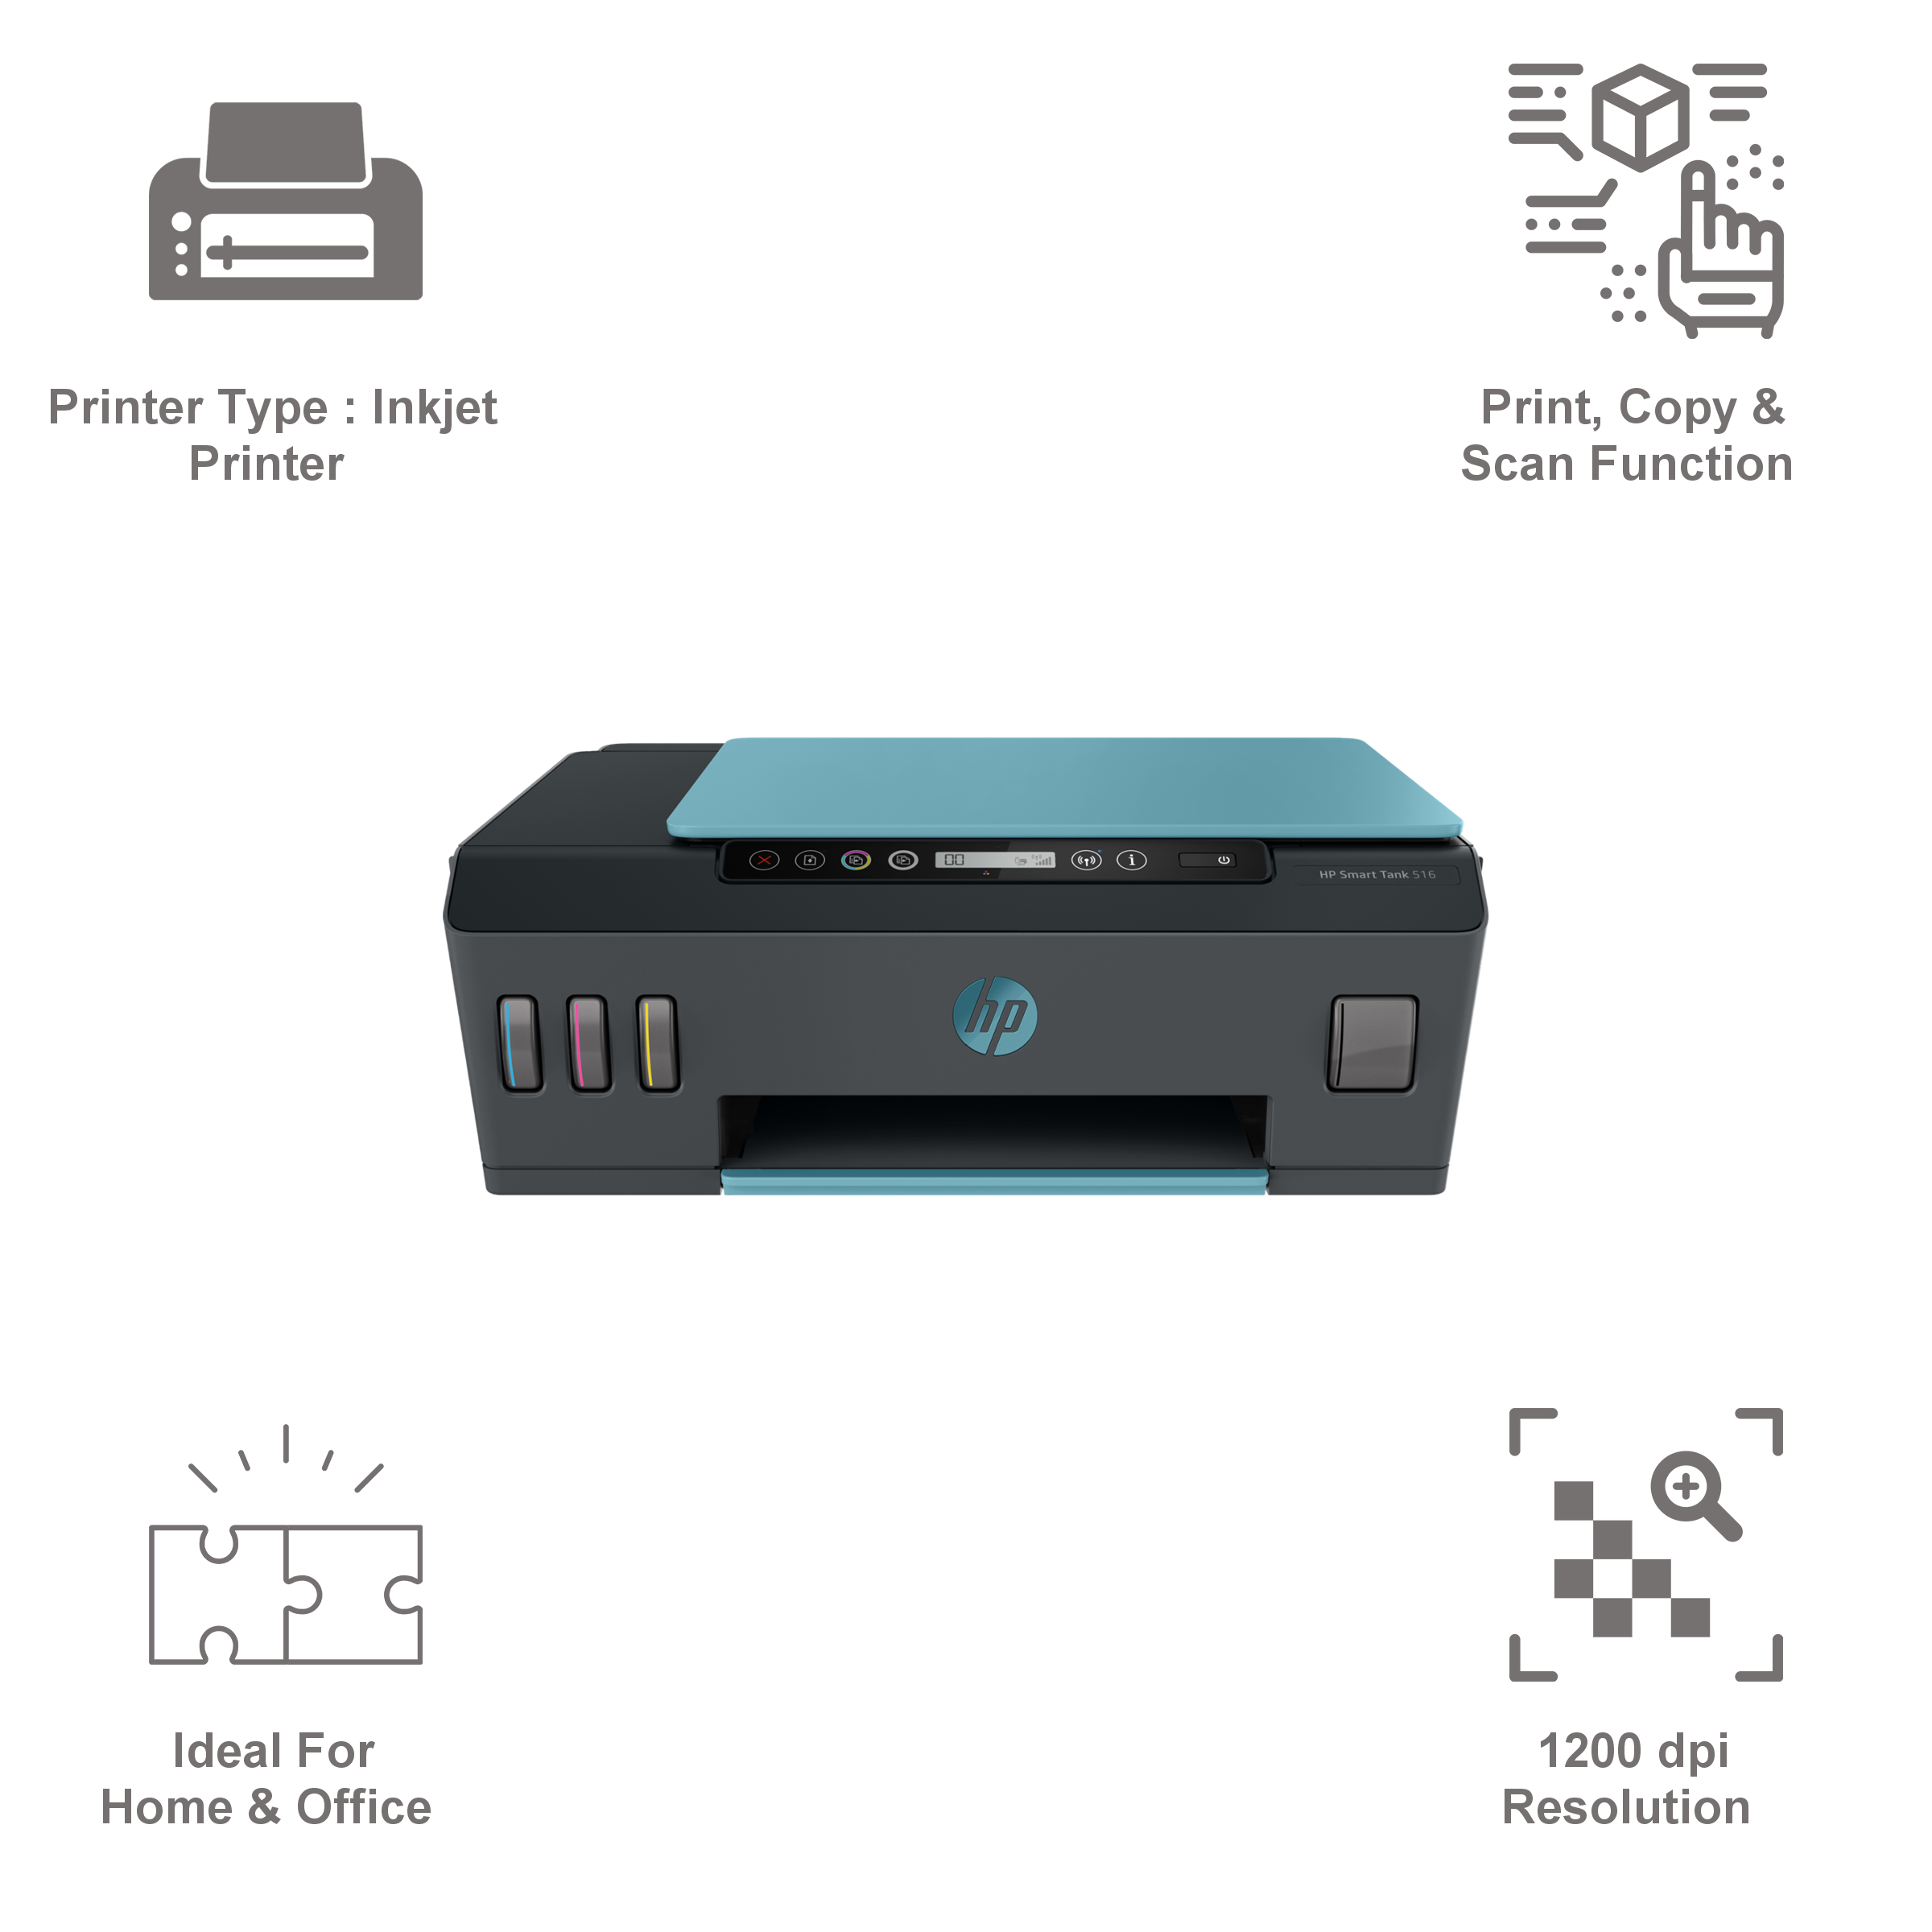 Buy Hp Smart Tank 516 Wireless Color All In One Inkjet Printer Borderless Printing 3yw70a 6394